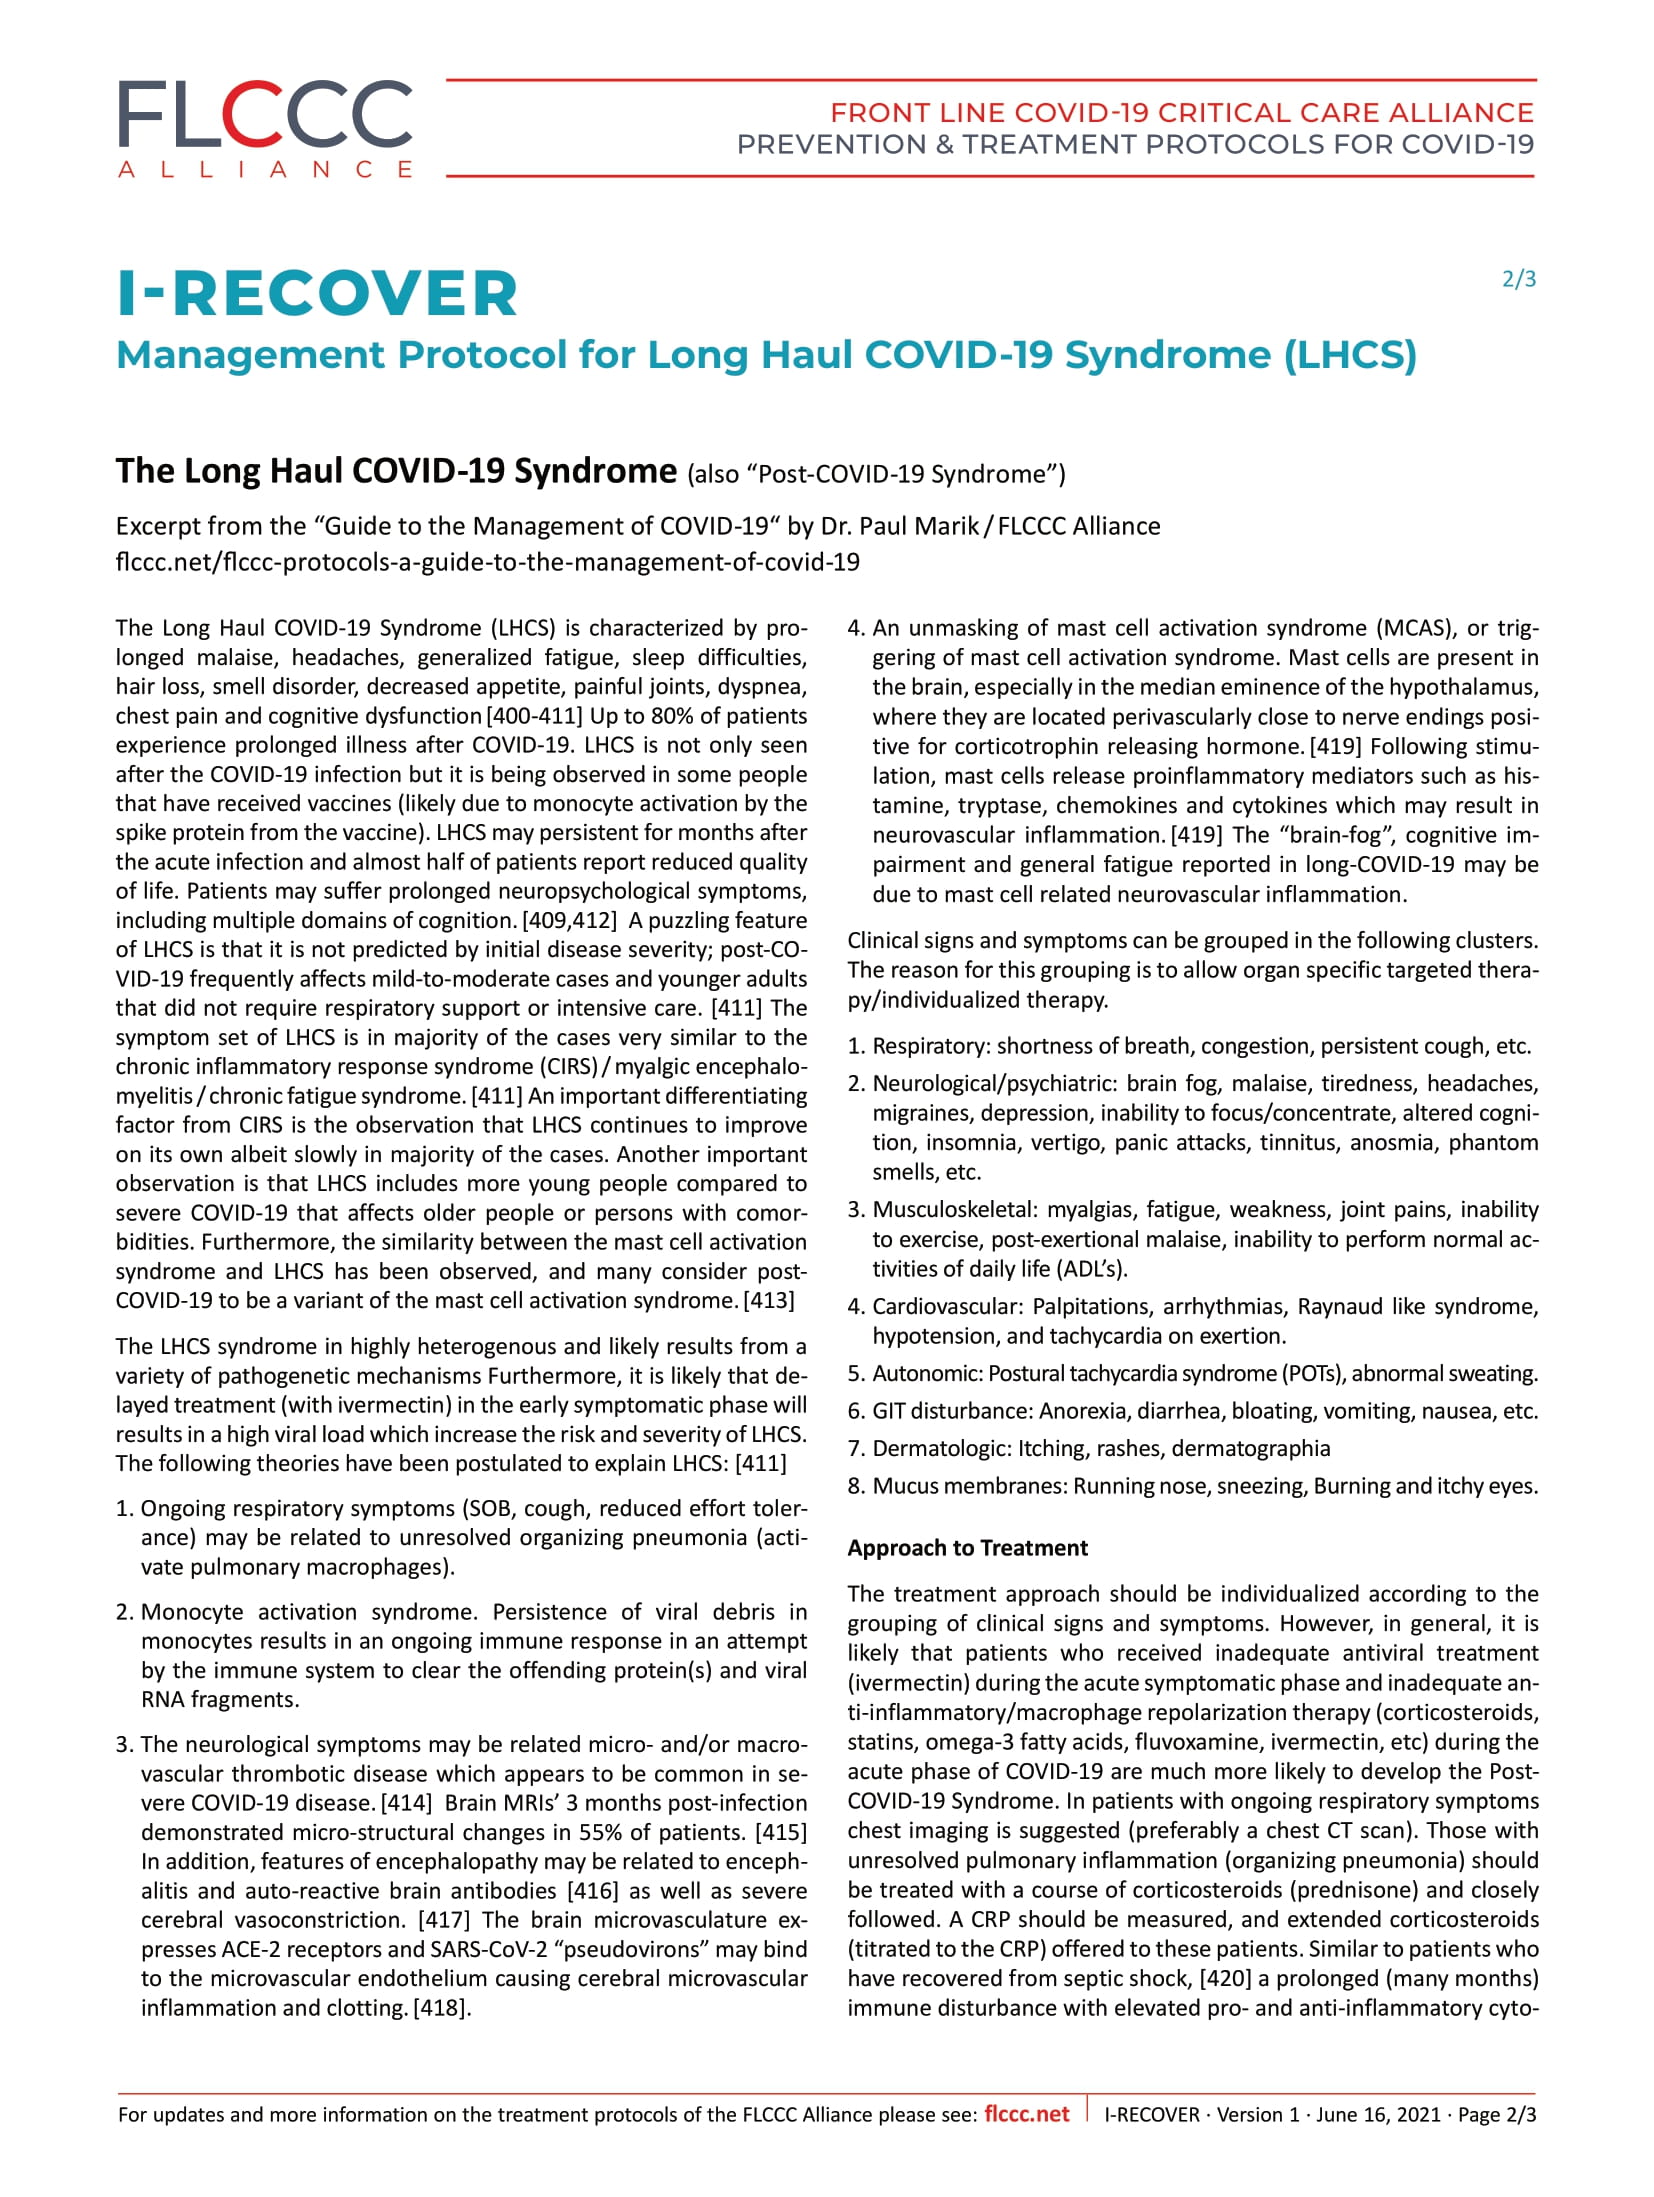 FLCCC Alliance I RECOVER Management Protocol for Long Haul COVID 19 Syndrome 2